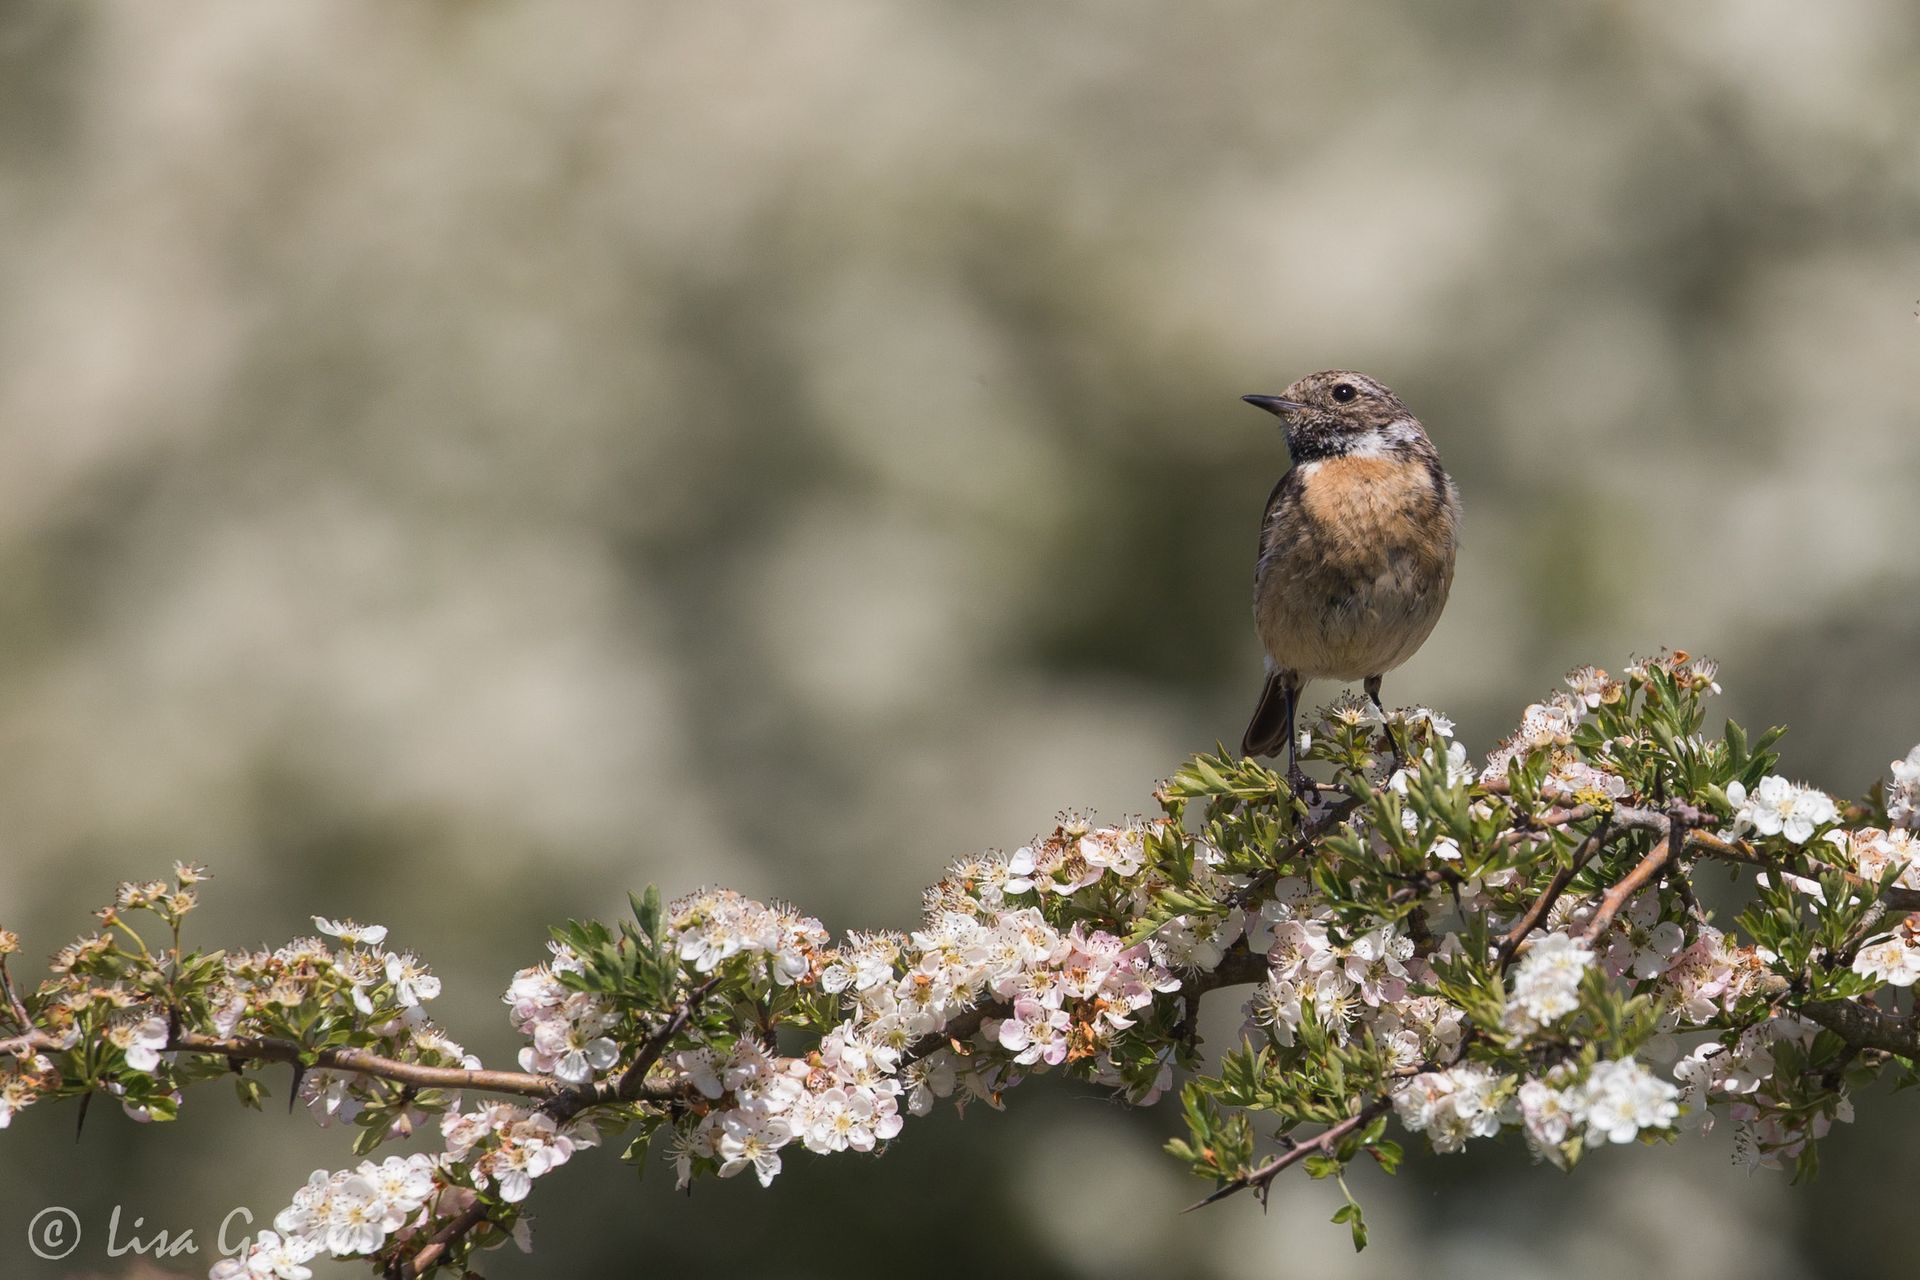 Juvenile Stonechat on Hawthorn branch in blossom